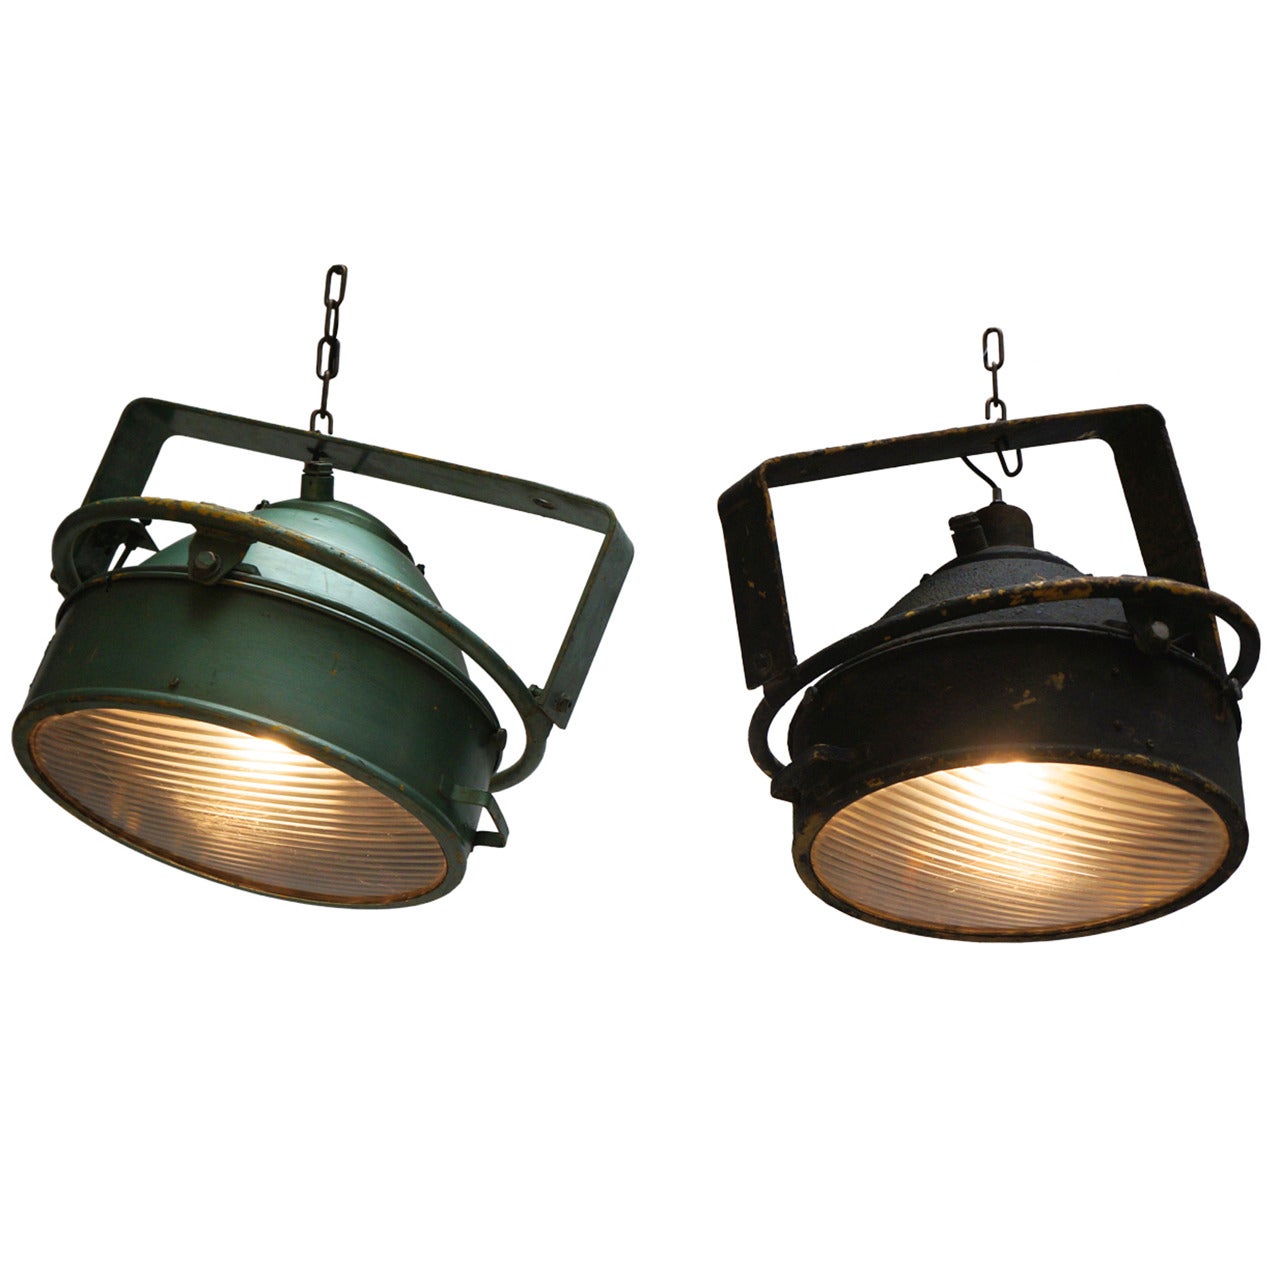 One of Two Industrial Pendant Lights For Sale